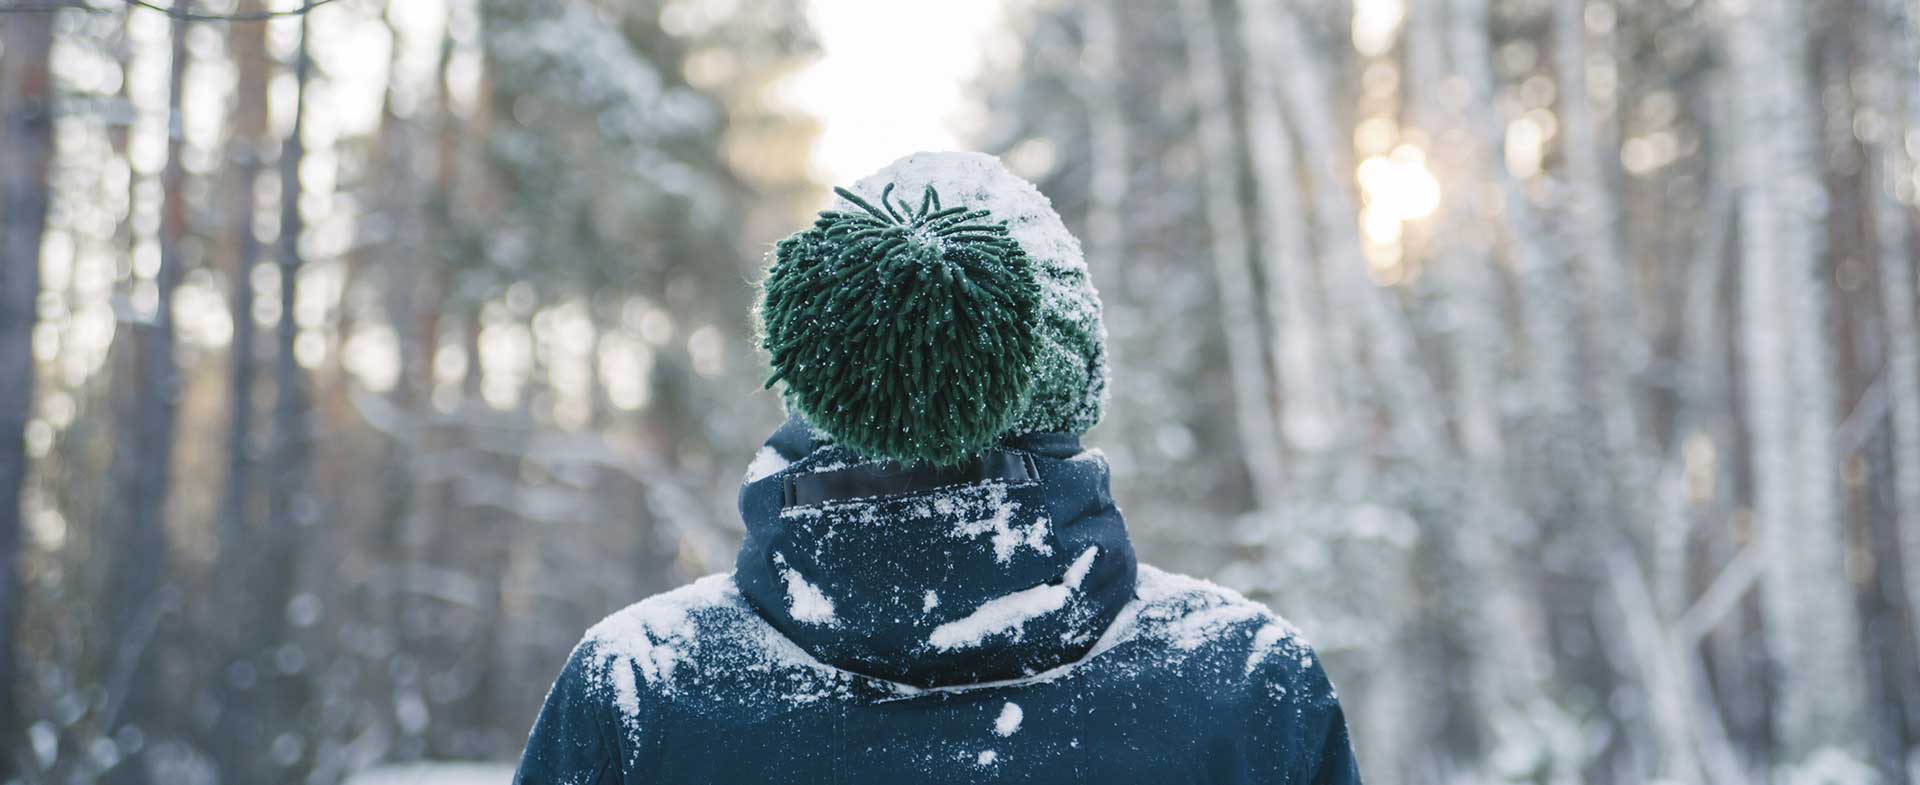 How cold weather could cause ear problems